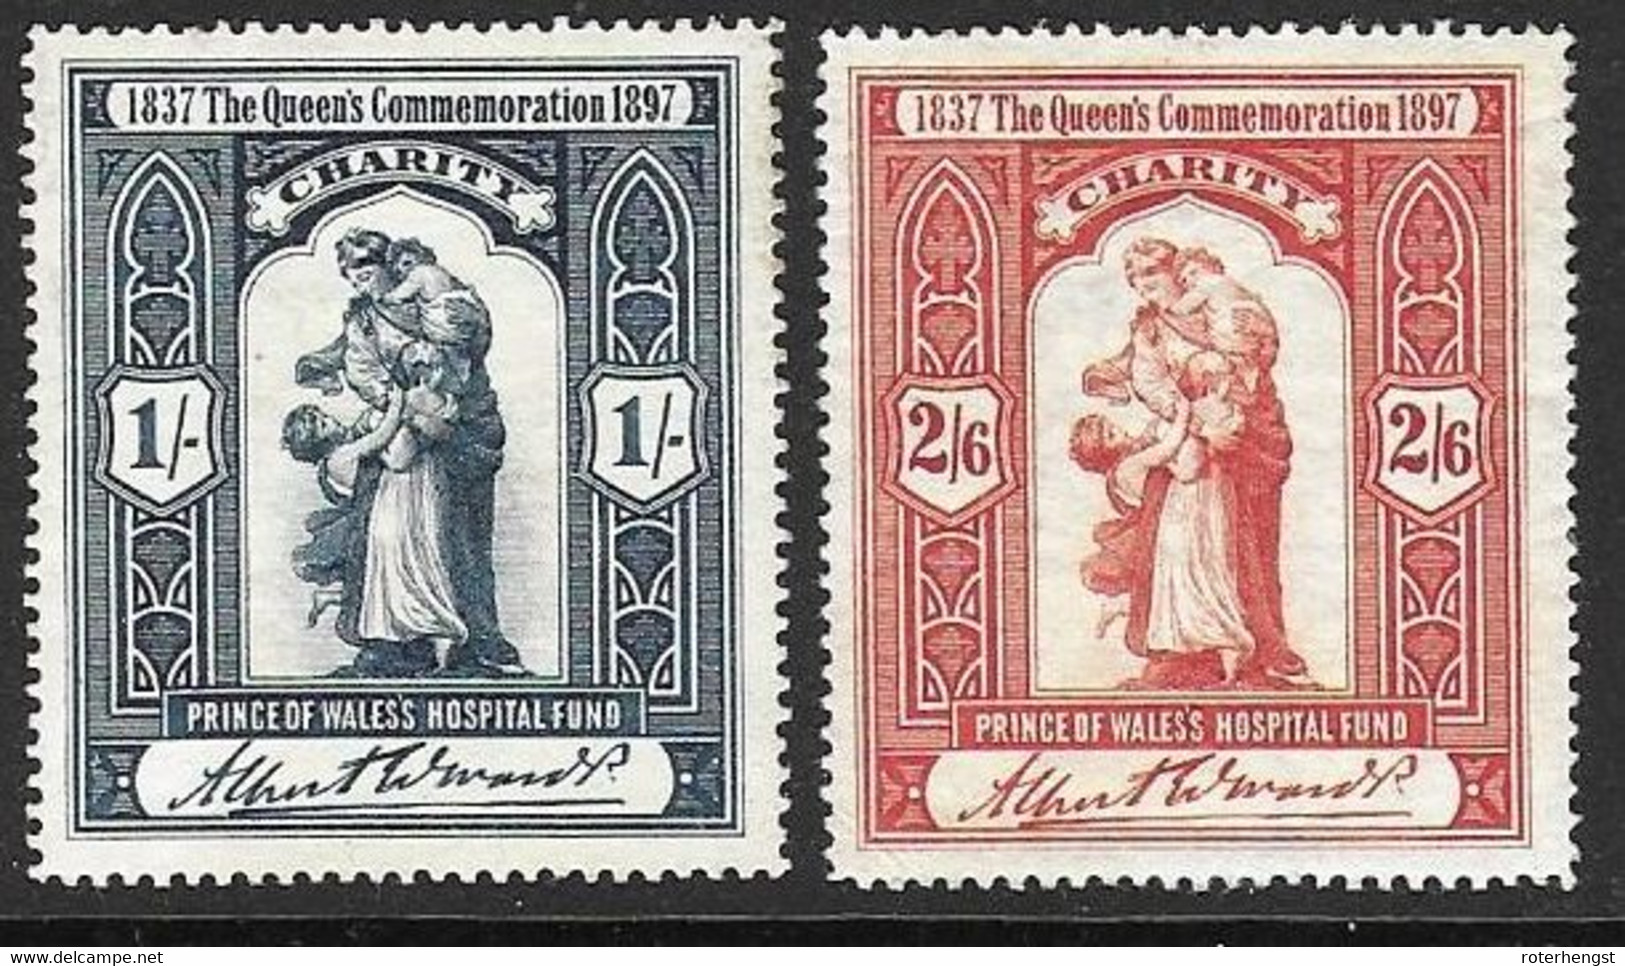 Queens Commemoration 1897 Mh * Charity Stamps - Nuevos